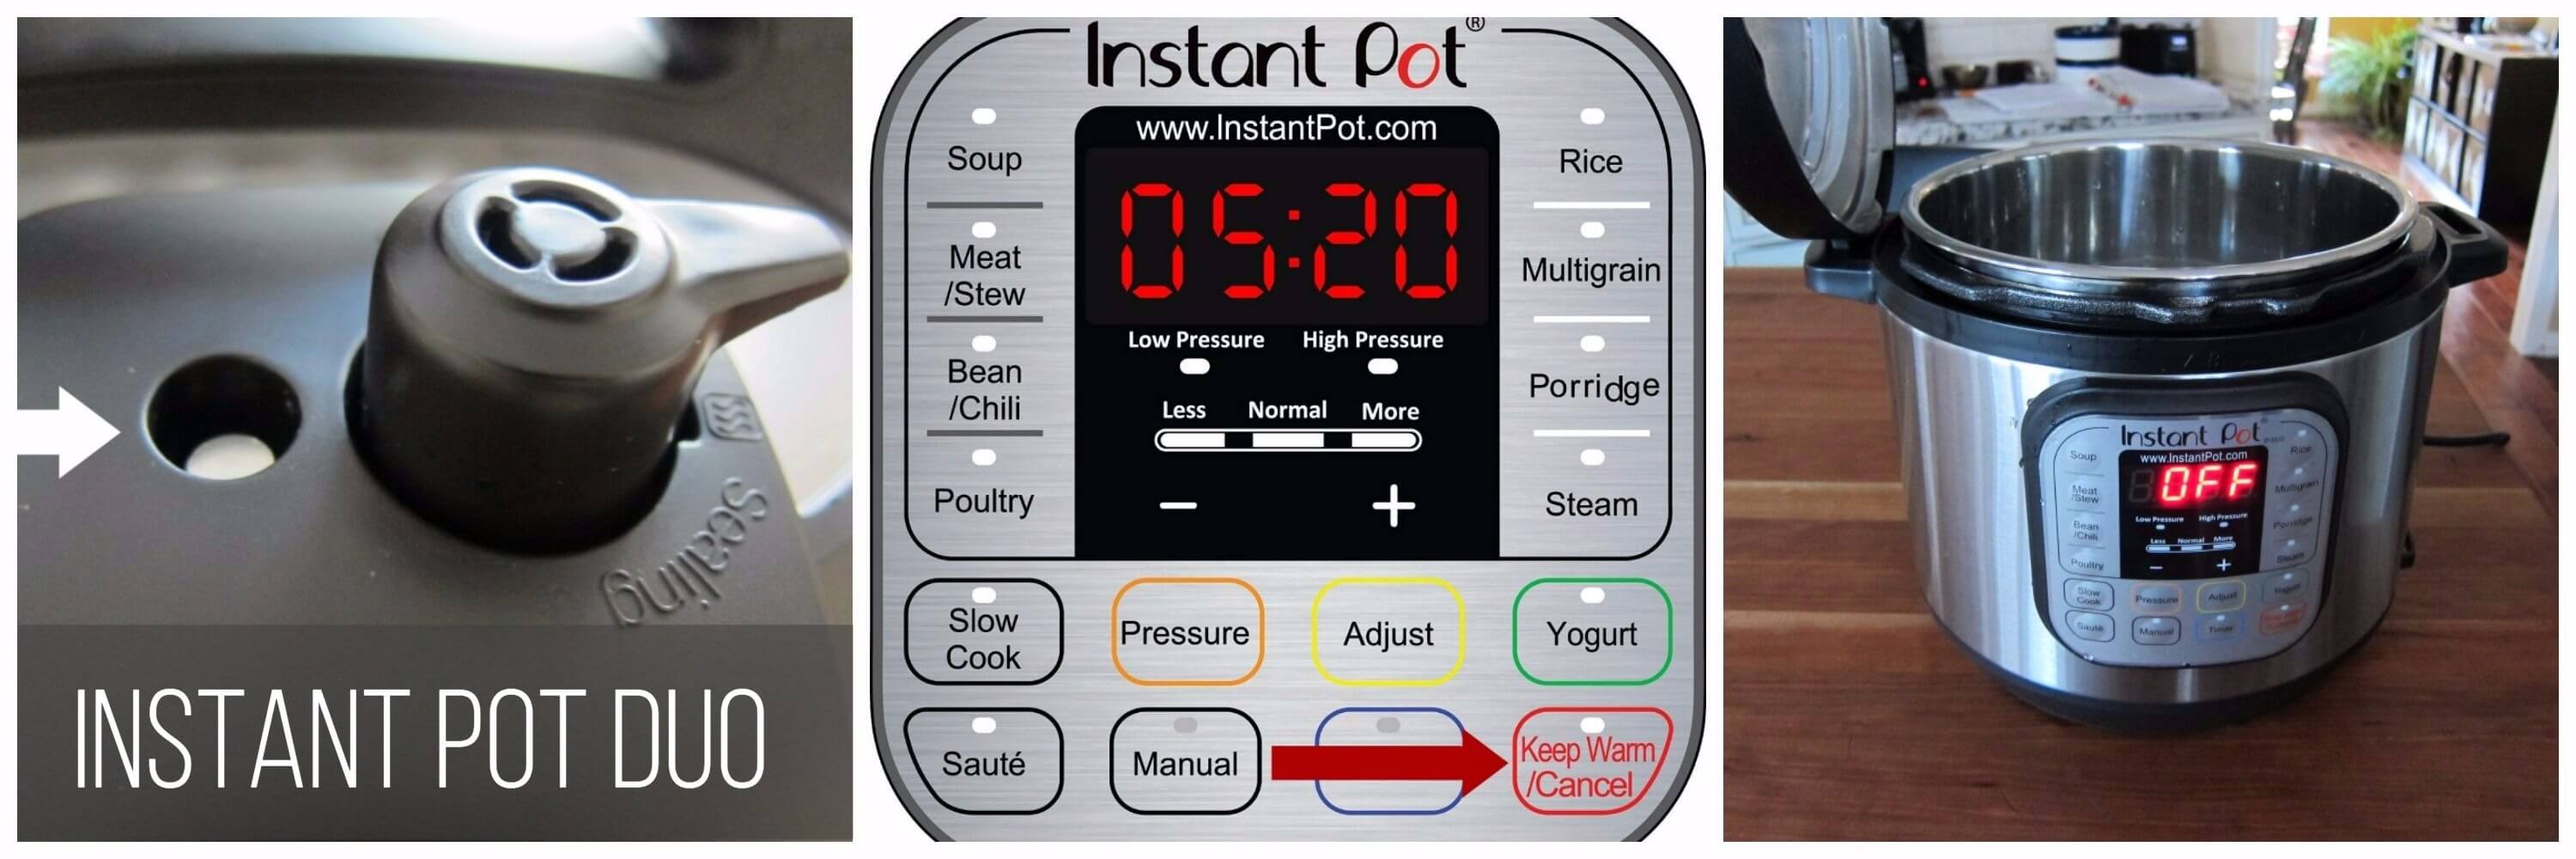 Instant Pot Duo natural release cancel and open collage - float valve is down, arrow pointing to Cancel, lid is open - Paint the Kitchen Red